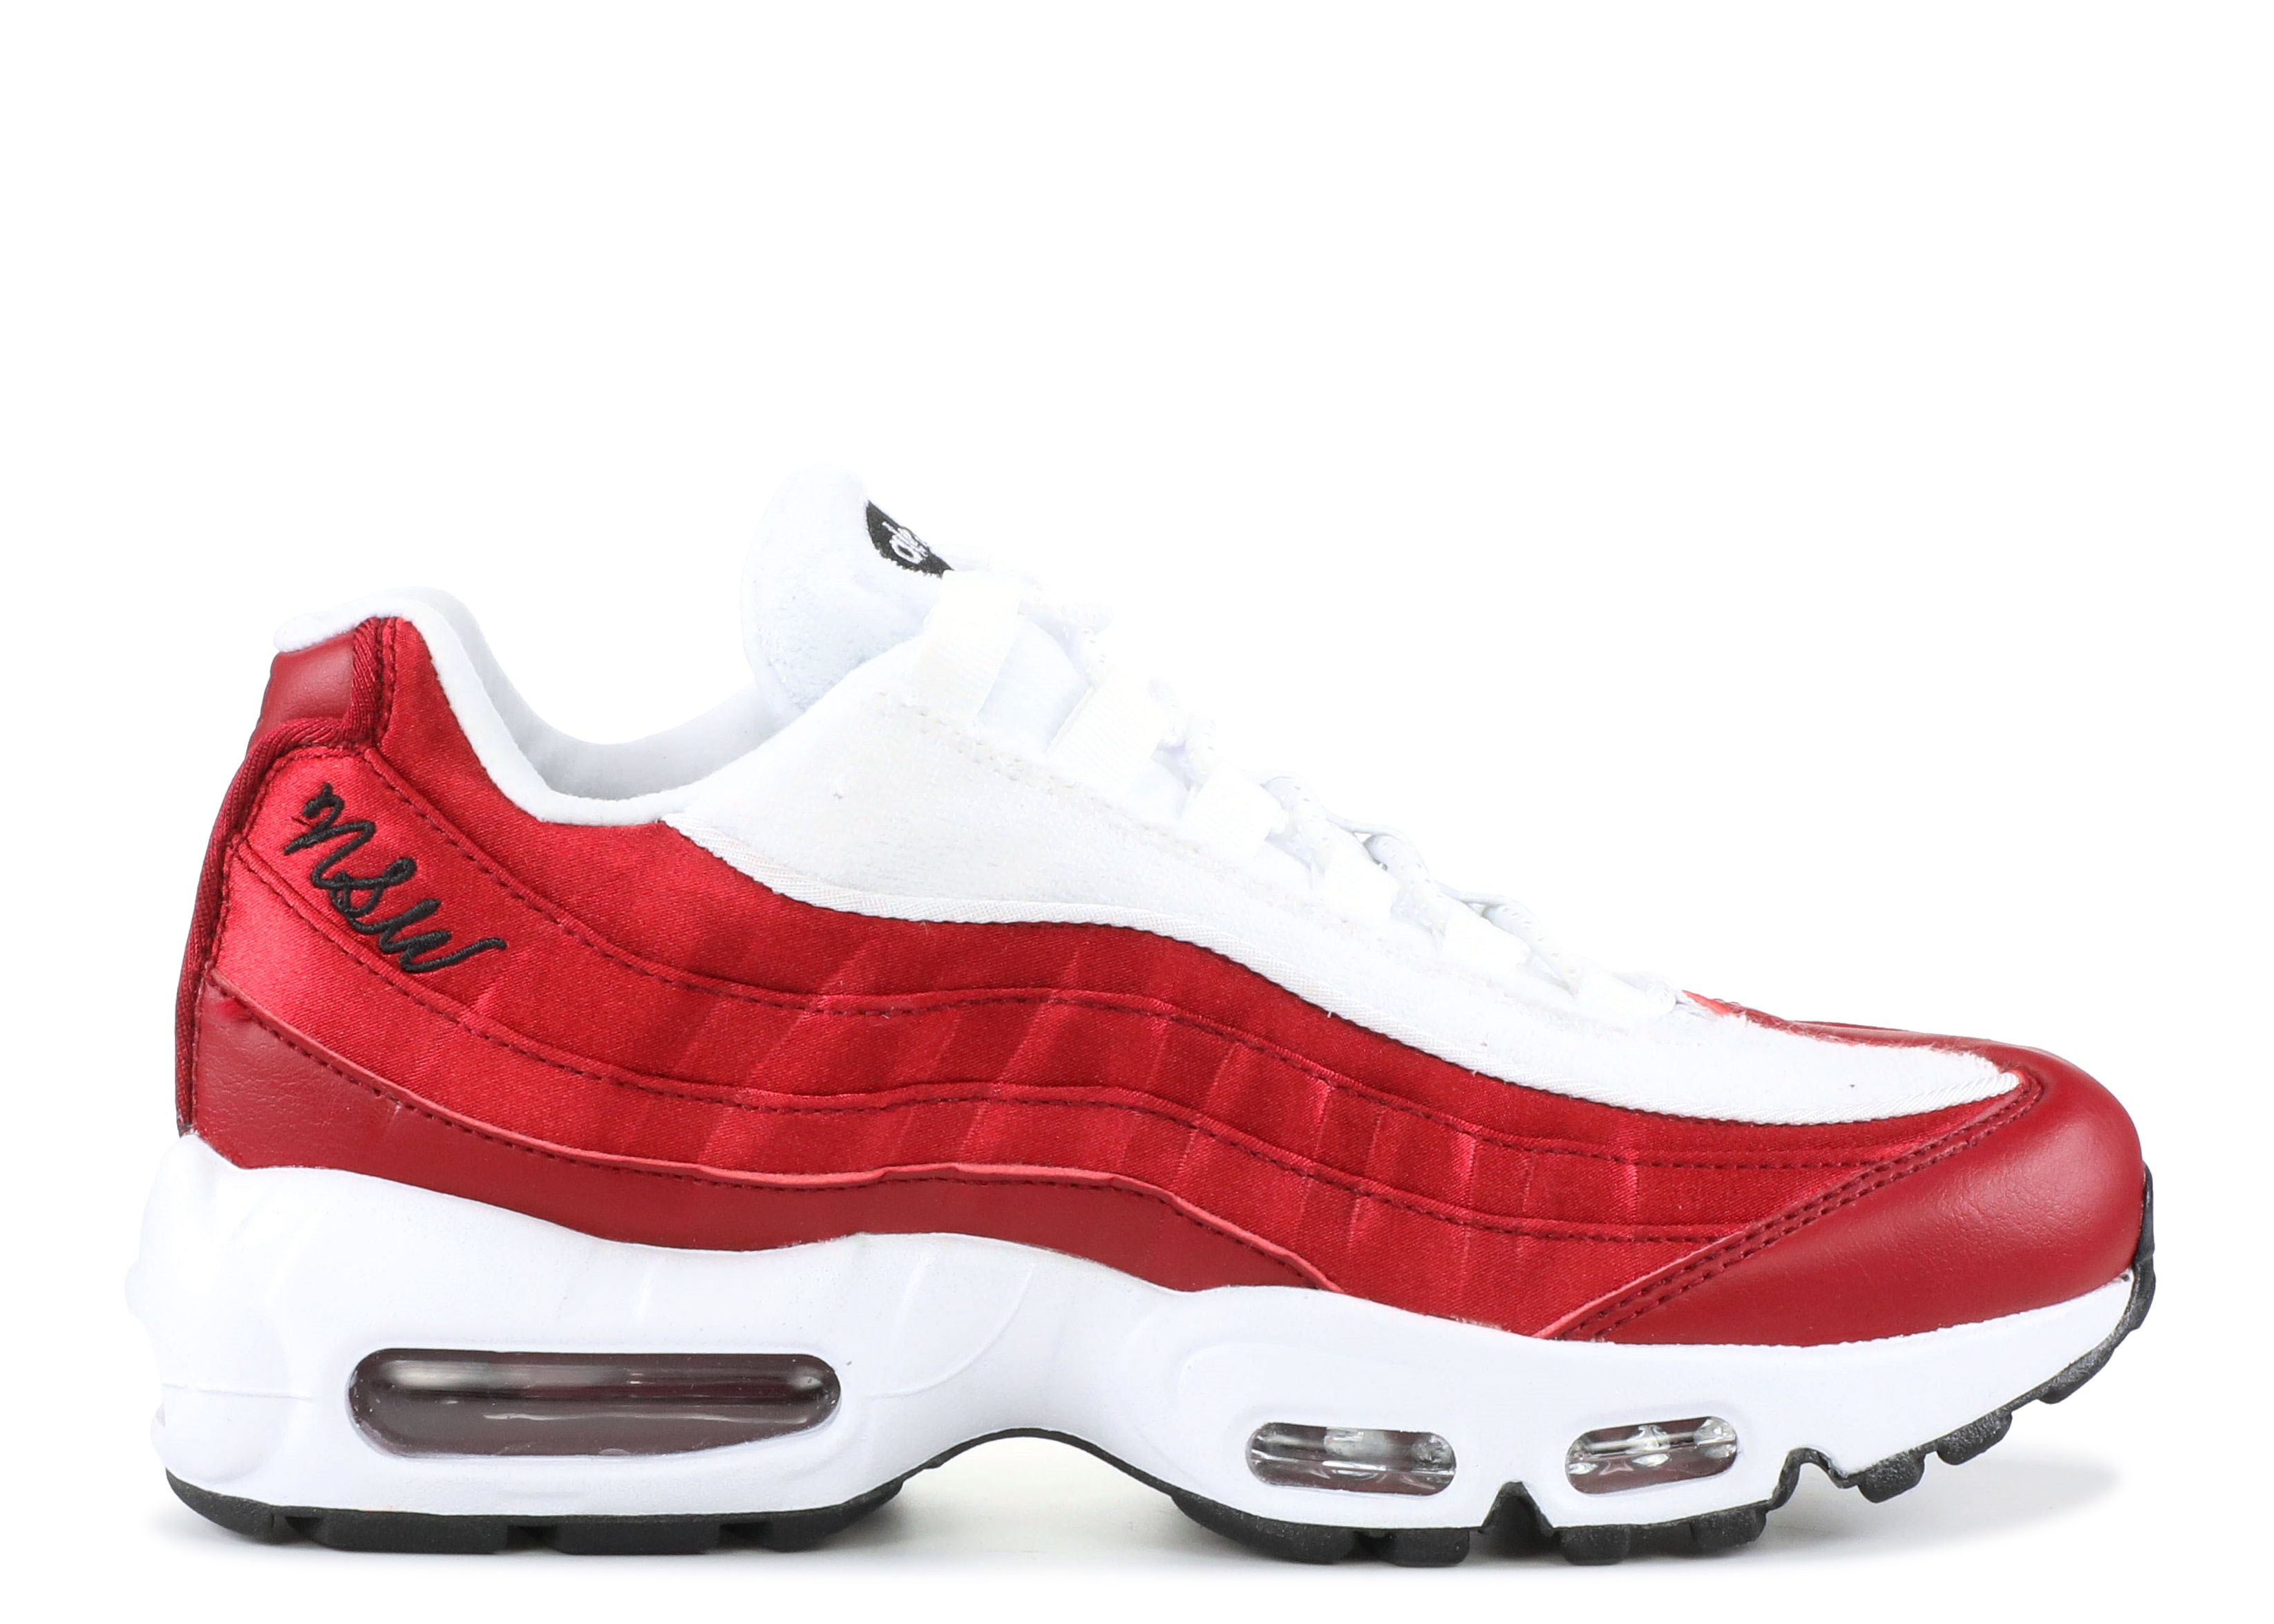 iron food Disconnection Wmns Air Max 95 LX 'NSW' - Nike - AA1103 601 - red crush/white-black |  Flight Club